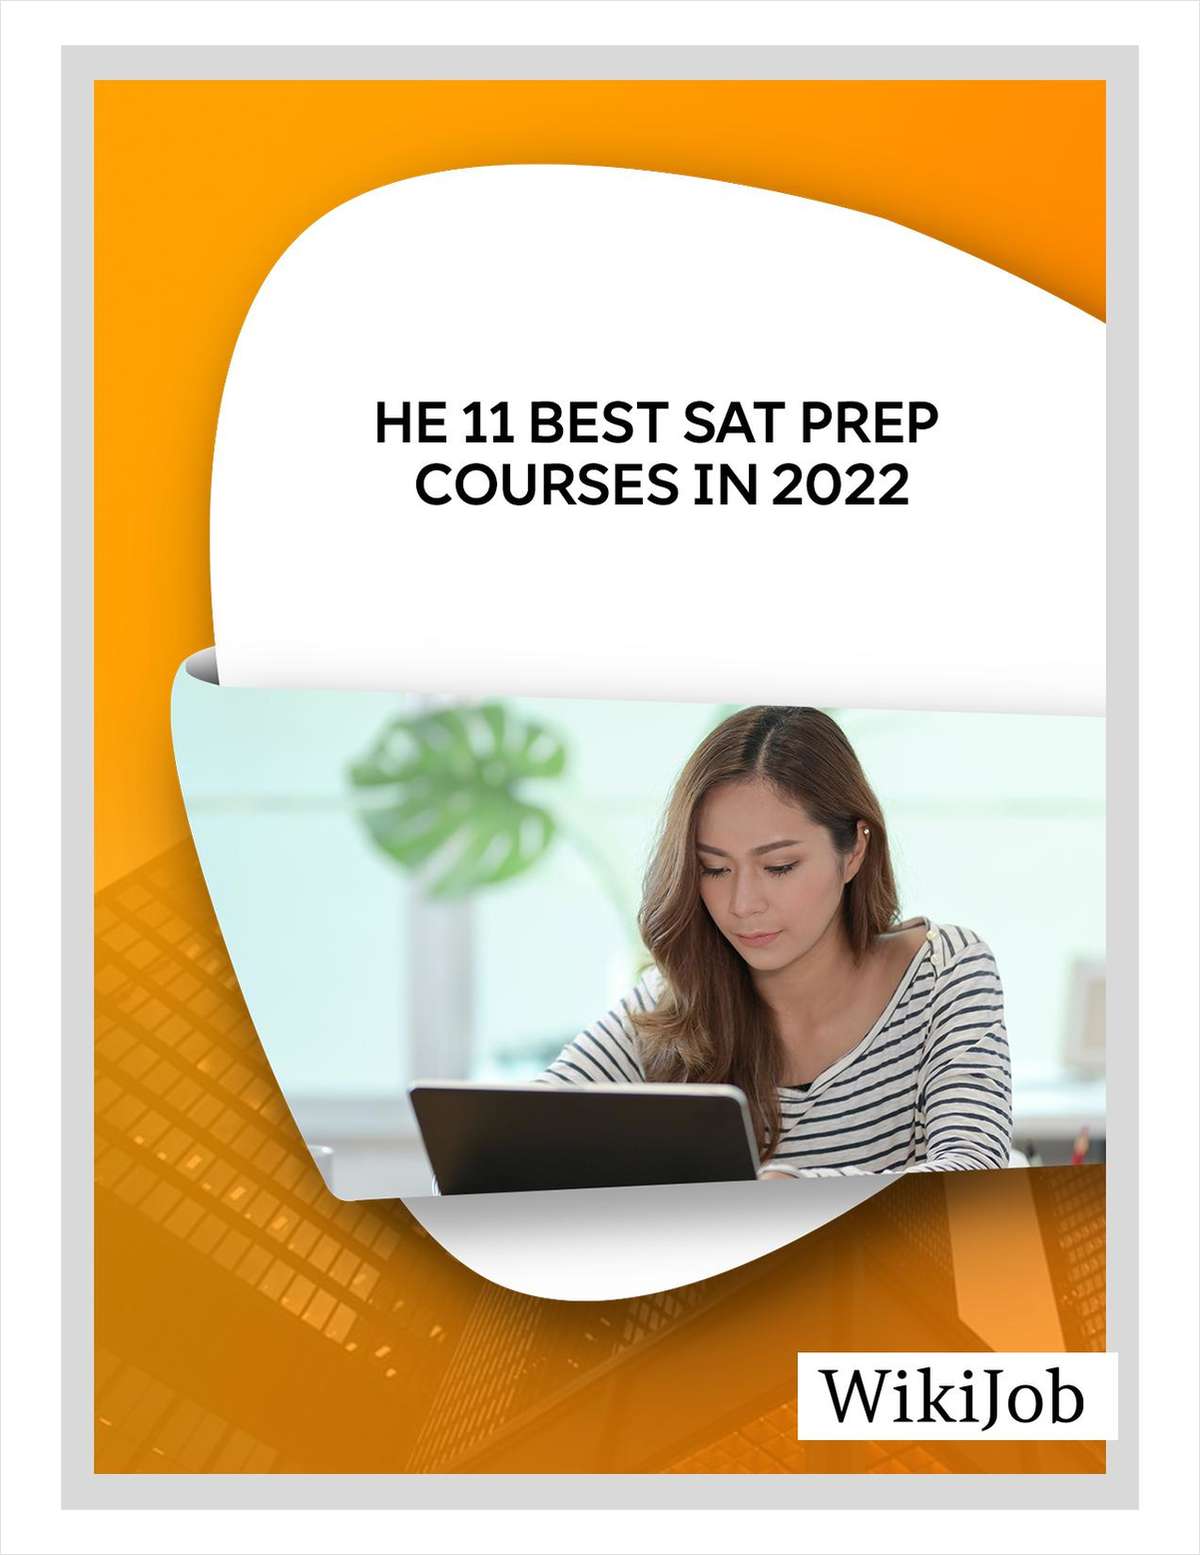 The 11 Best SAT Prep Courses In 2022